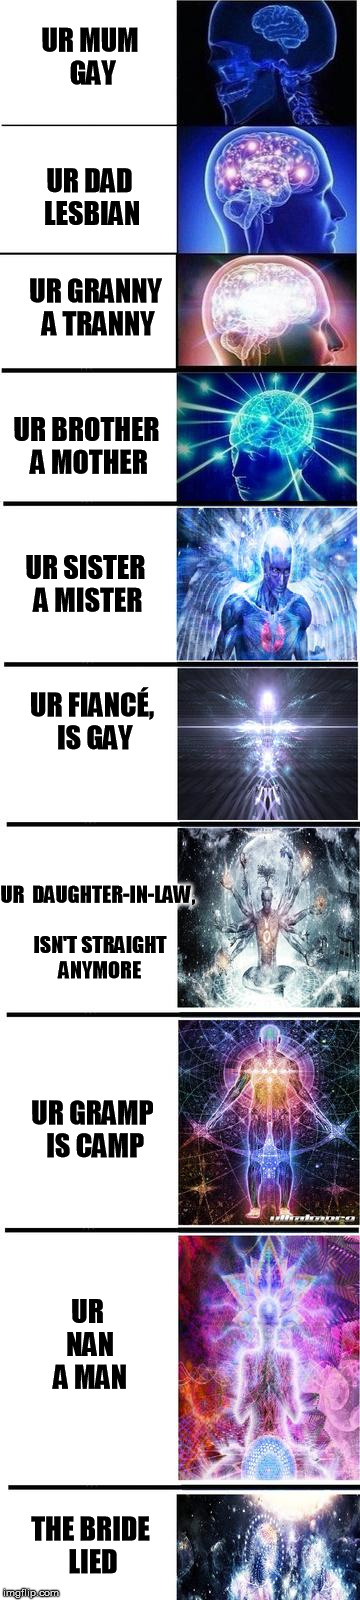 expanding brain | UR MUM GAY; UR DAD LESBIAN; UR GRANNY A TRANNY; UR BROTHER A MOTHER; UR SISTER A MISTER; UR FIANCÉ, IS GAY; UR 
DAUGHTER-IN-LAW, ISN'T STRAIGHT ANYMORE; UR GRAMP IS CAMP; UR NAN A MAN; THE BRIDE LIED | image tagged in expanding brain | made w/ Imgflip meme maker